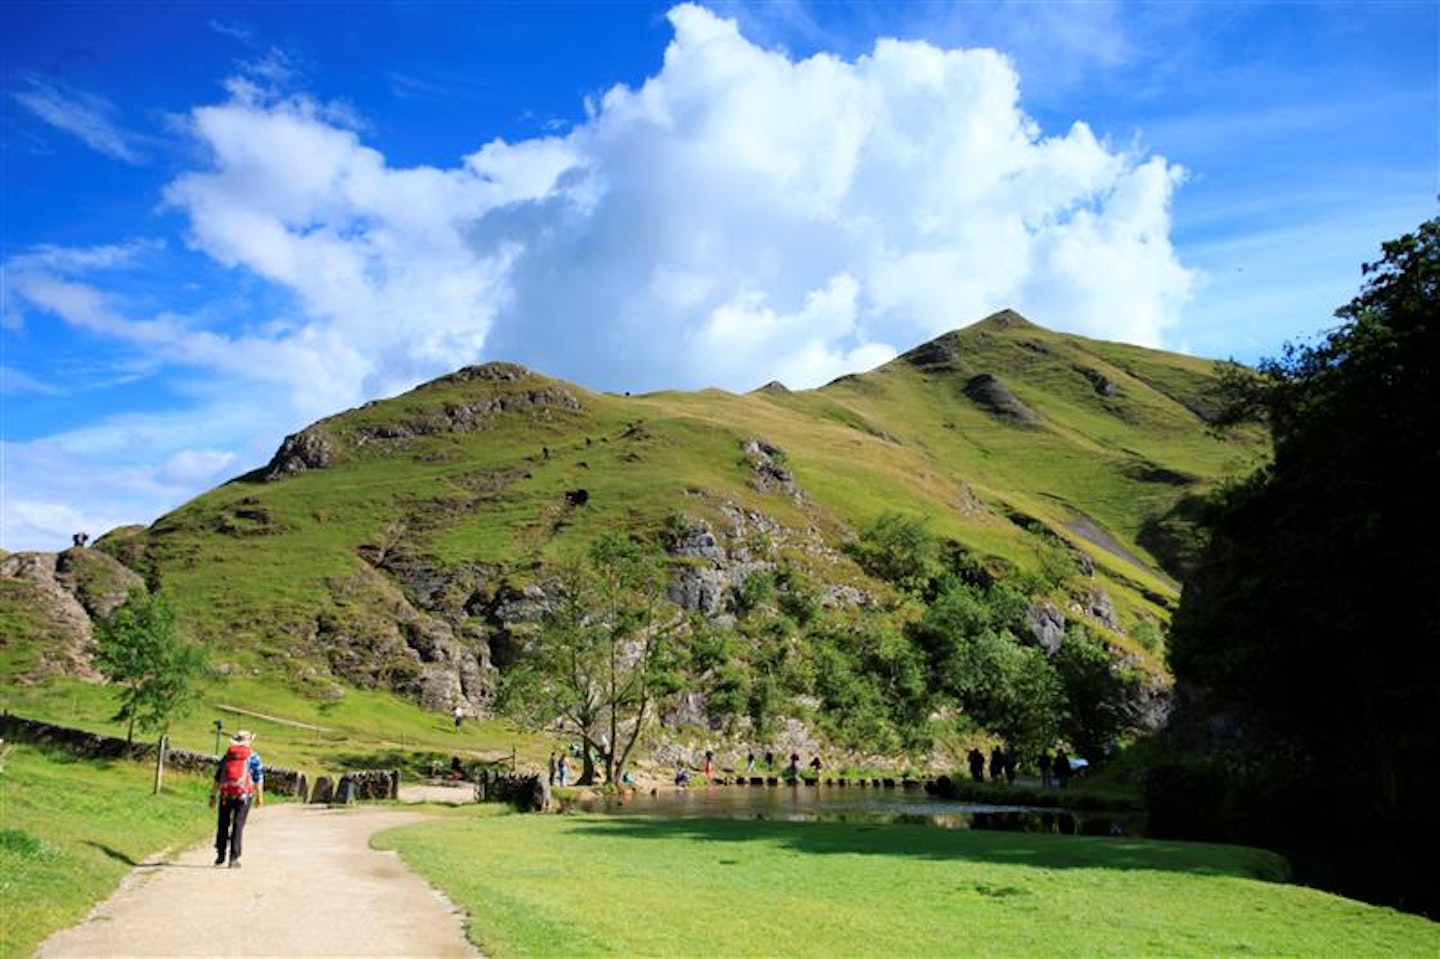 Peak district hikes and walking routes